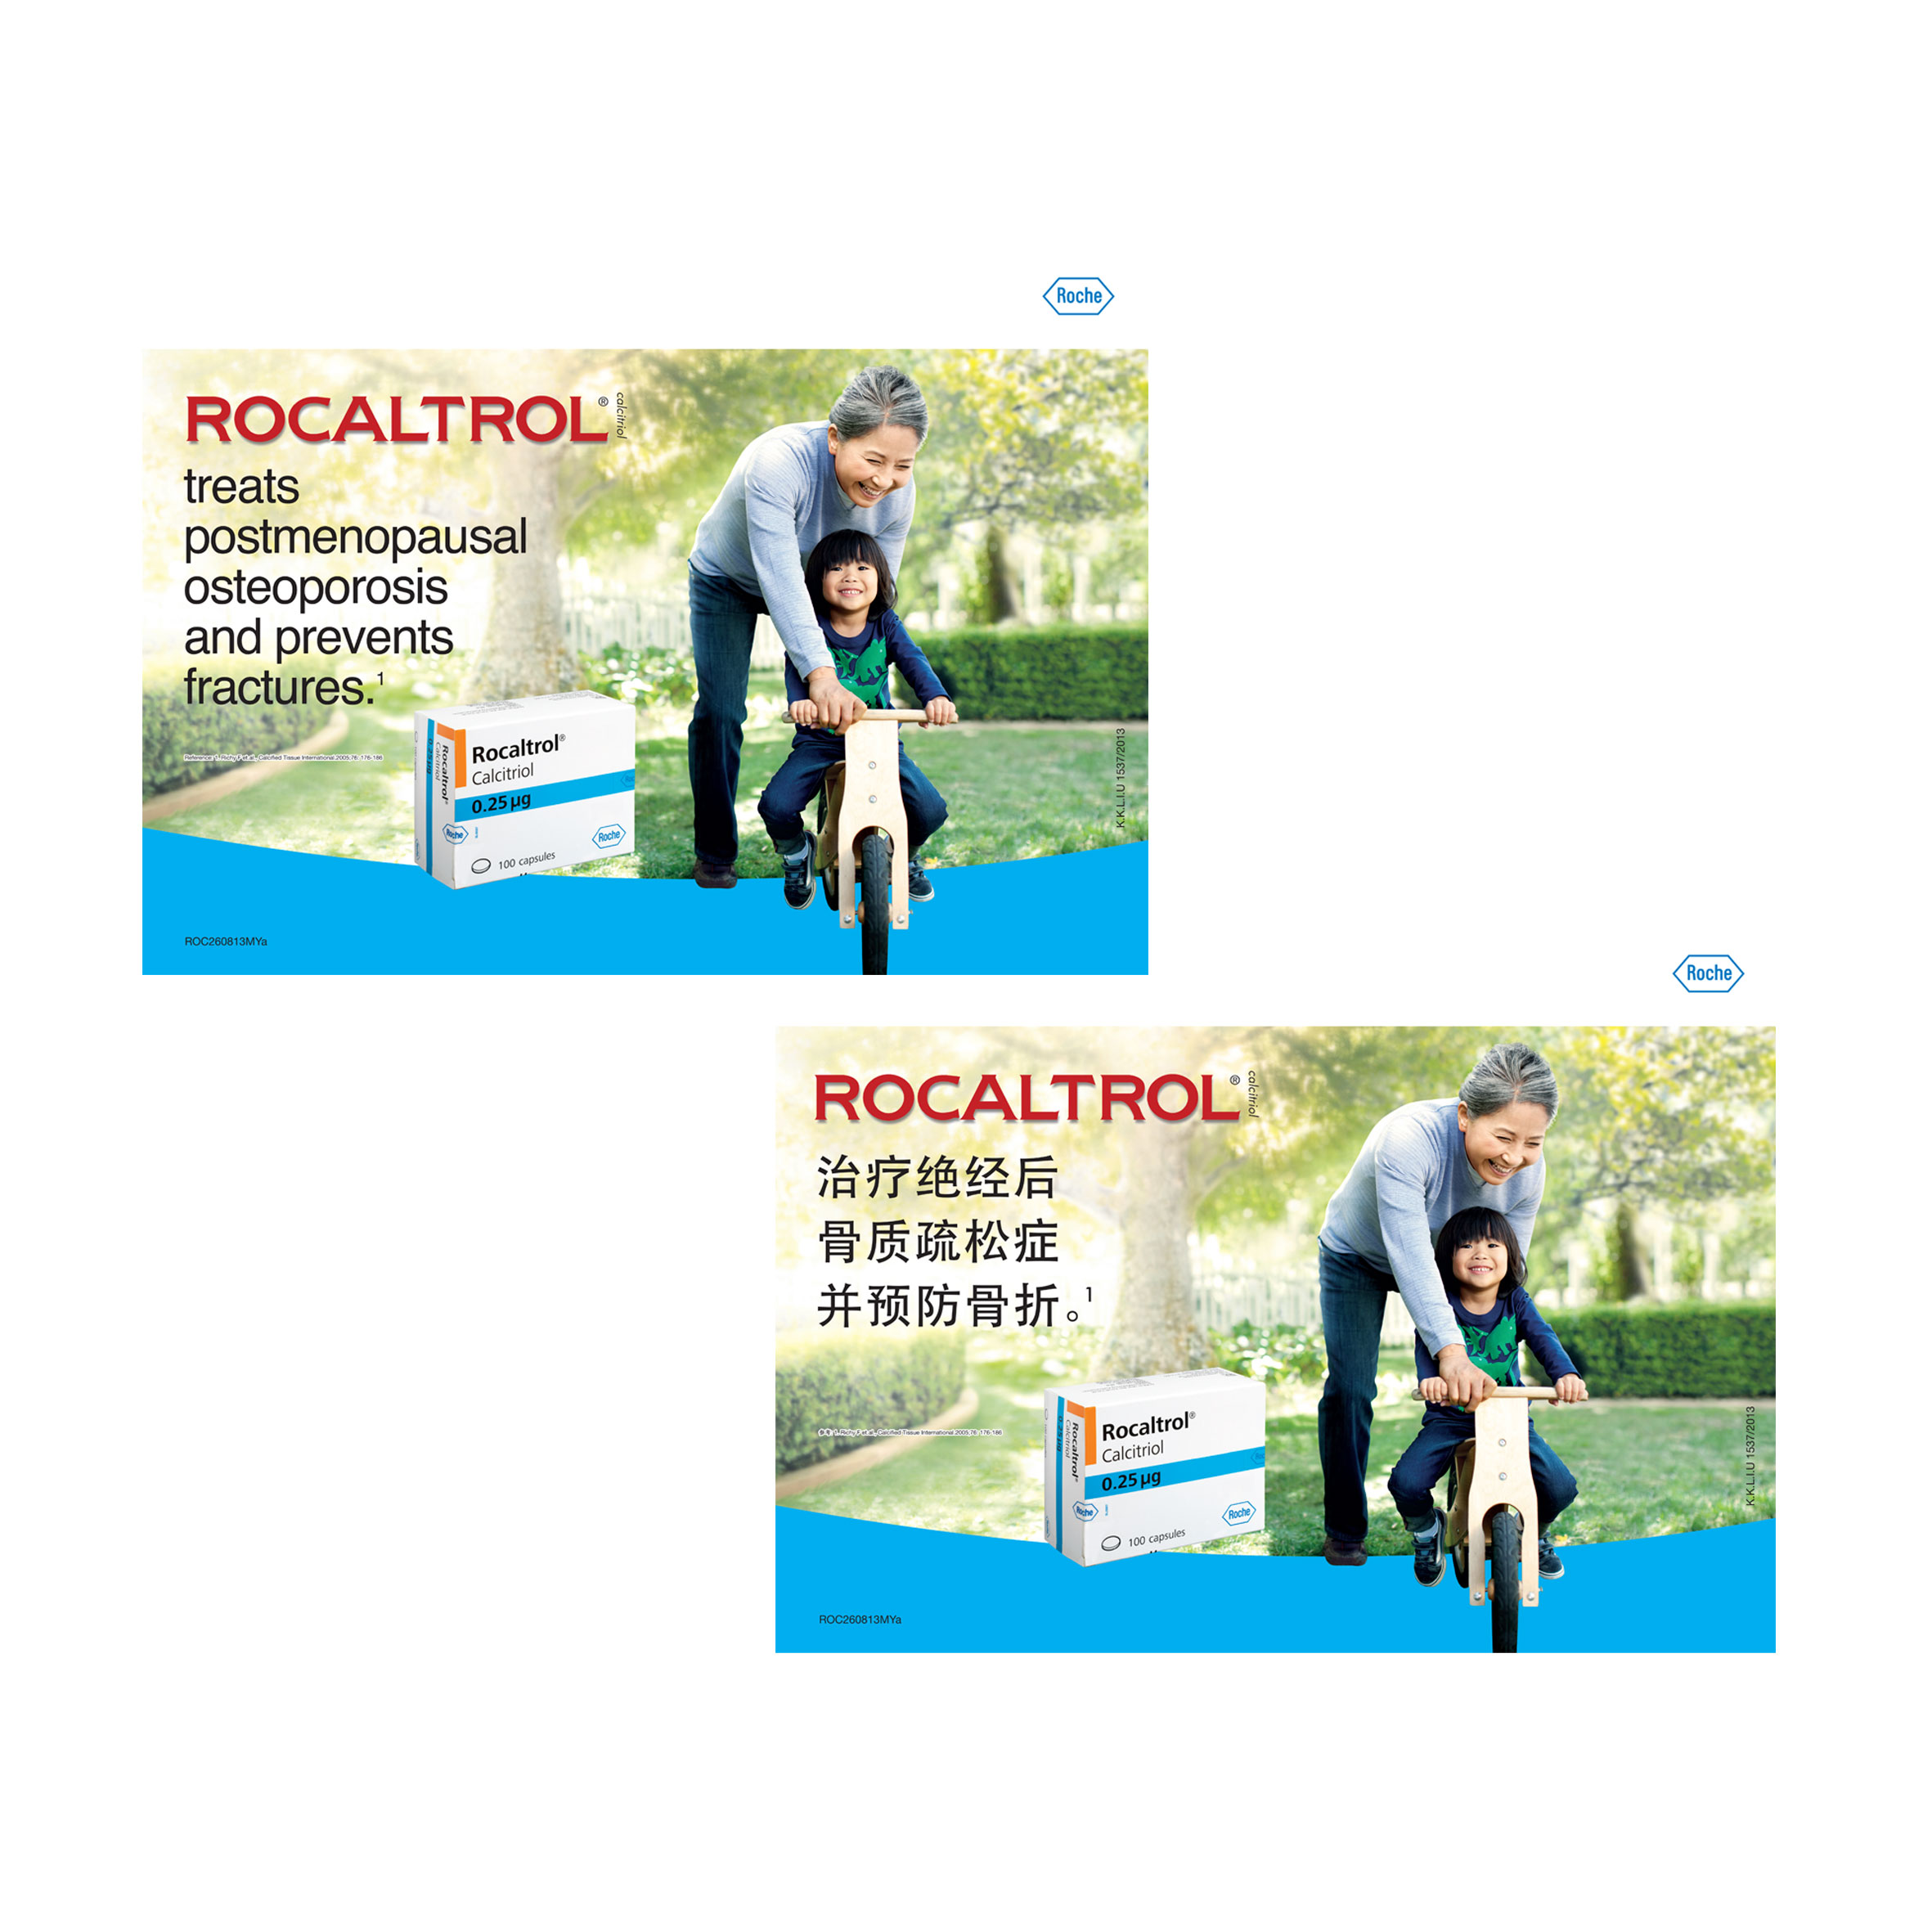 Rocaltrol Posters